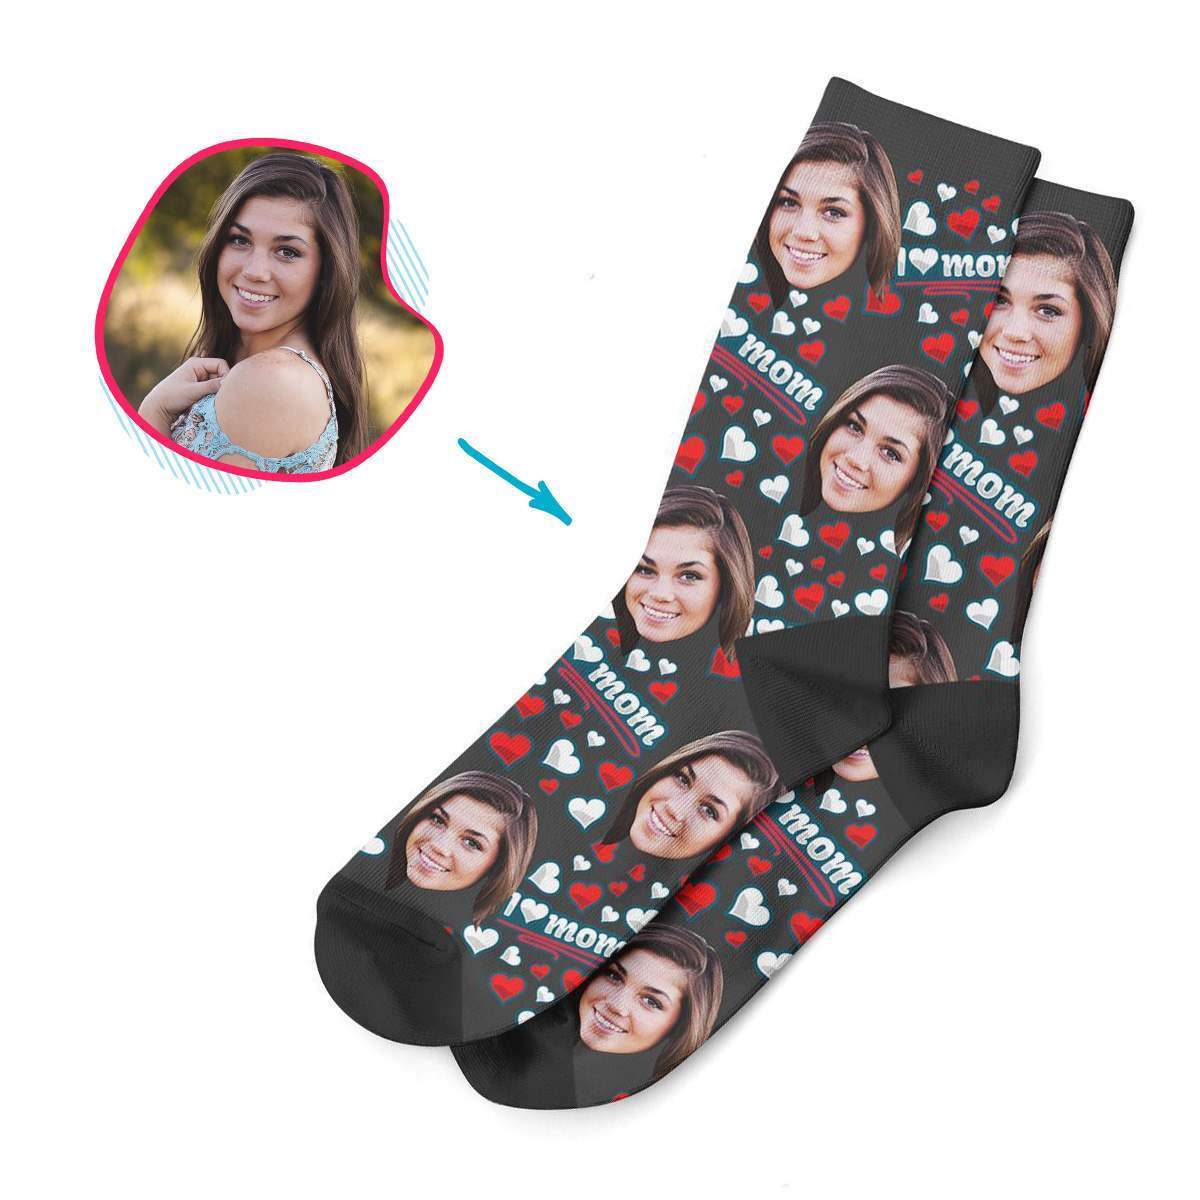 dark Love Mom socks personalized with photo of face printed on them